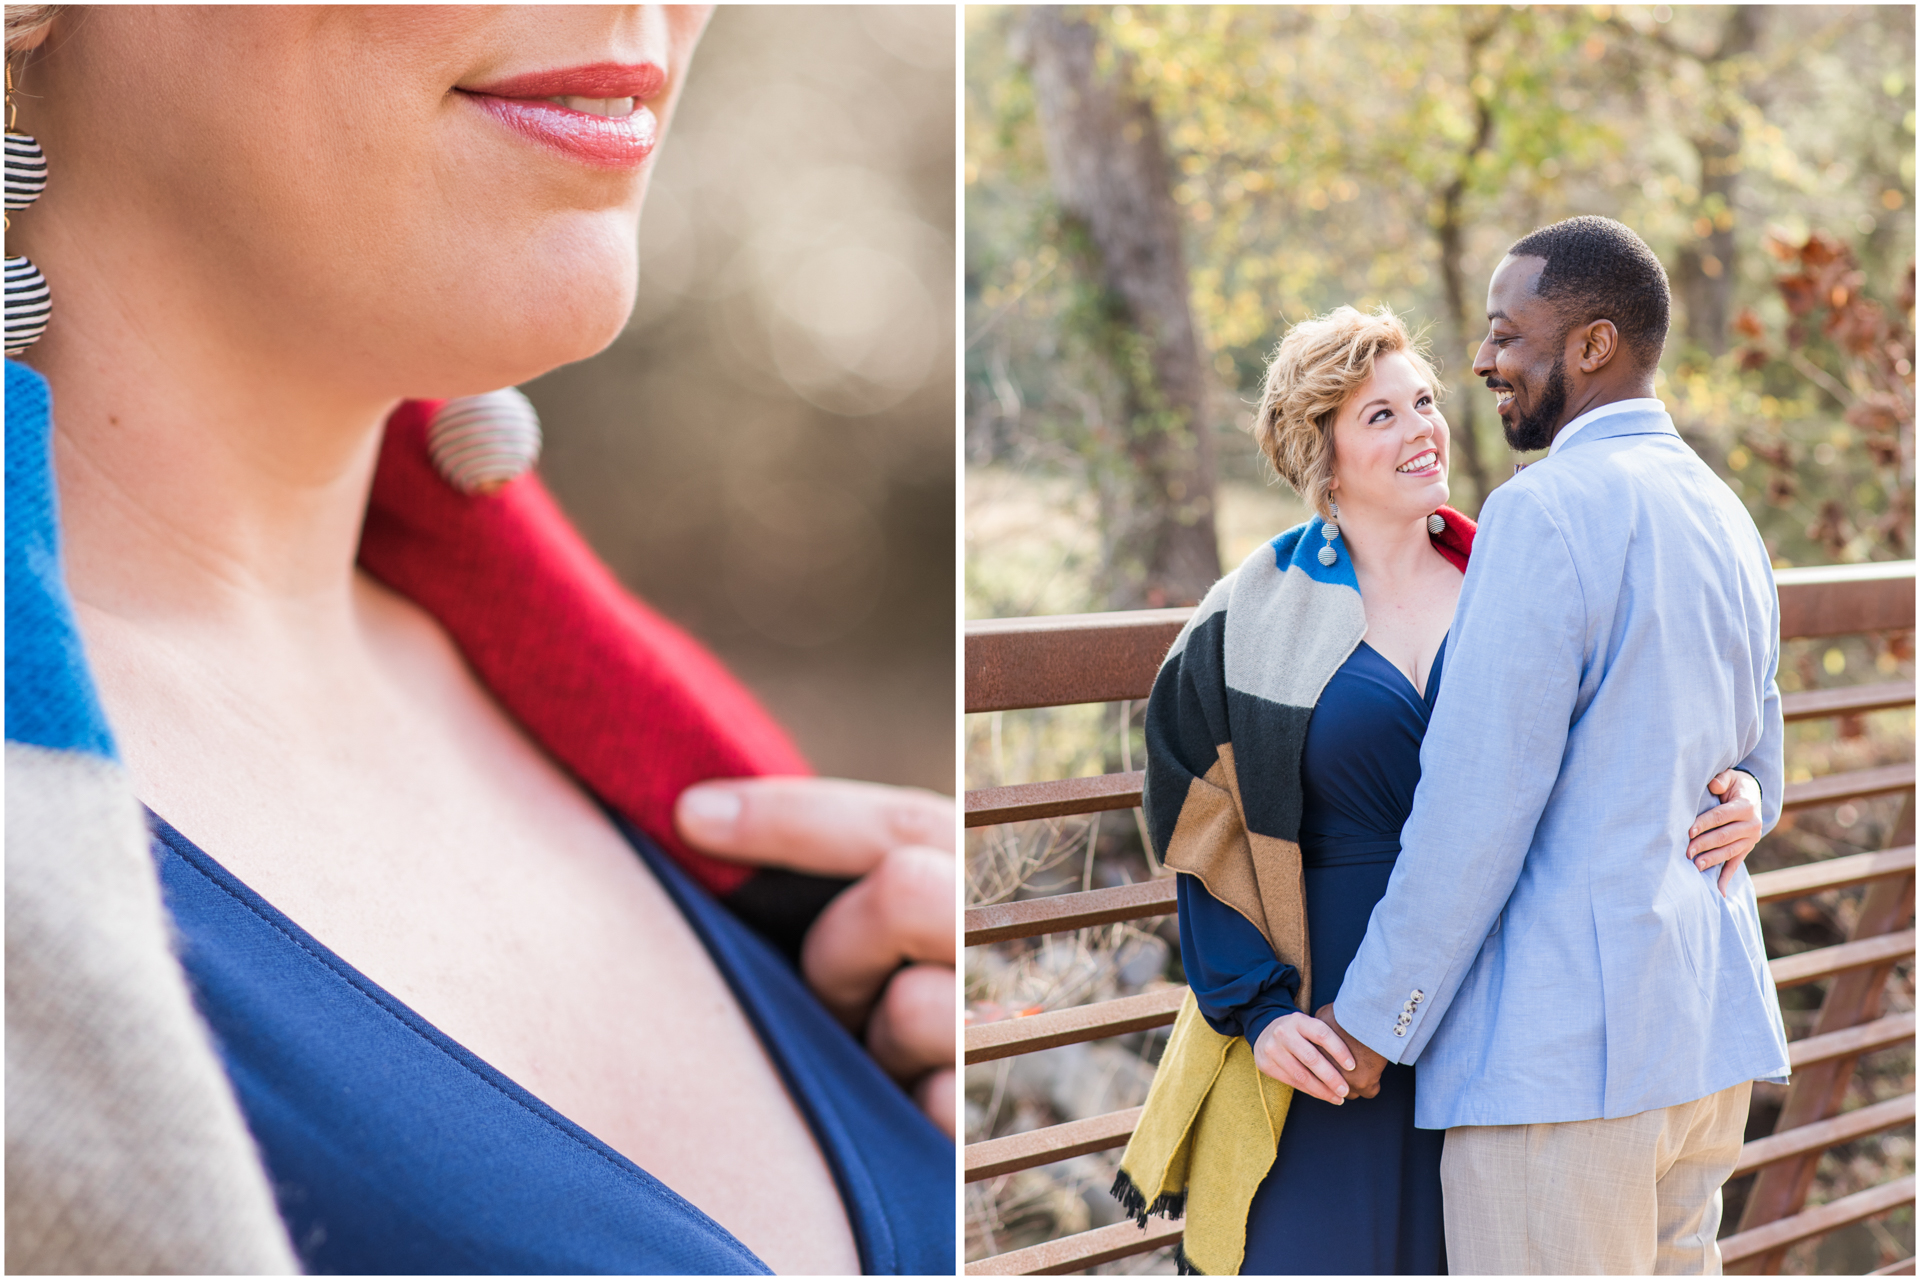 Iron Bridge - Couples session - colorful outfits